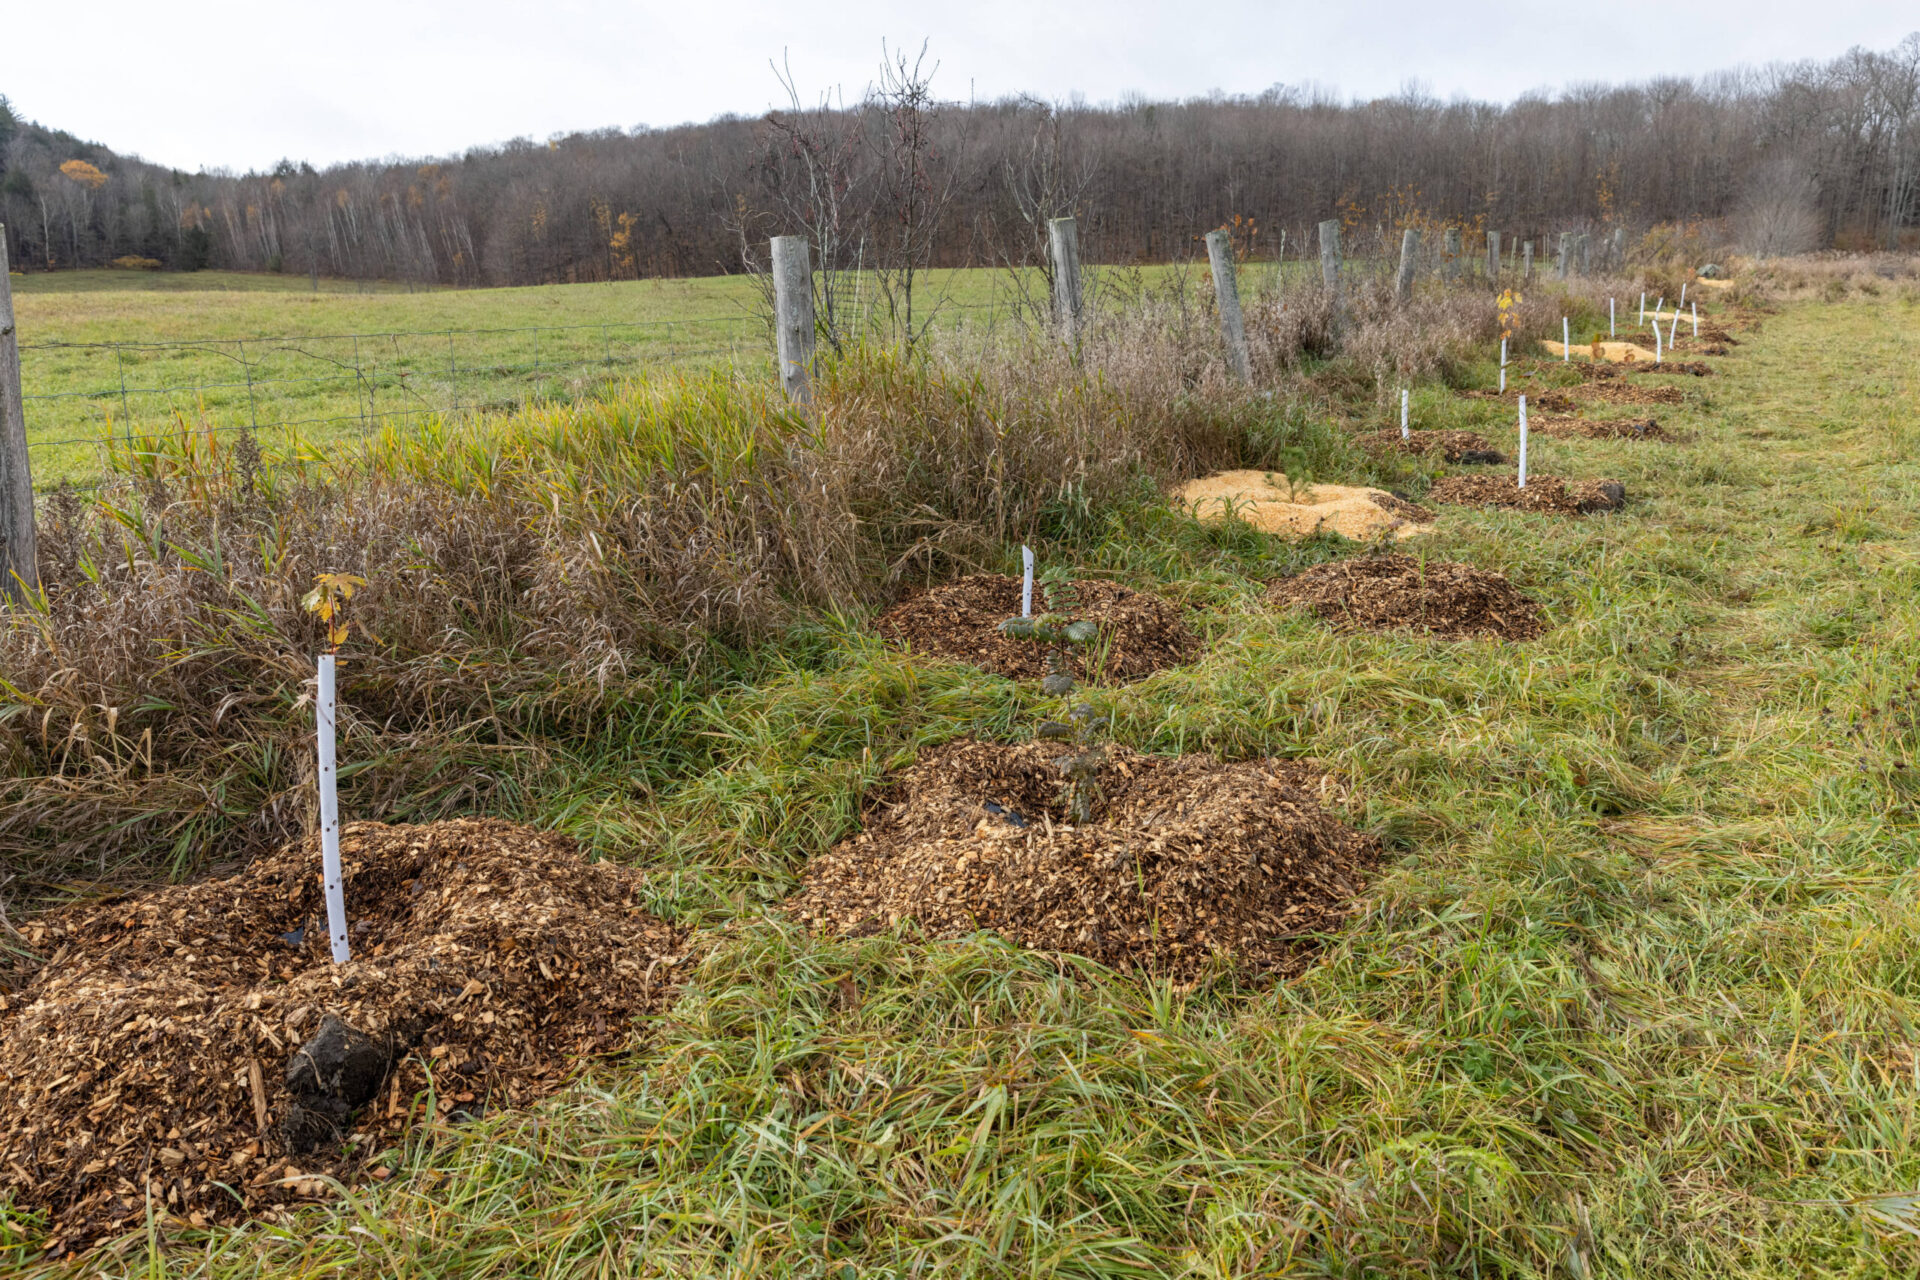 Row of newly planted tree saplings in a field along a fence